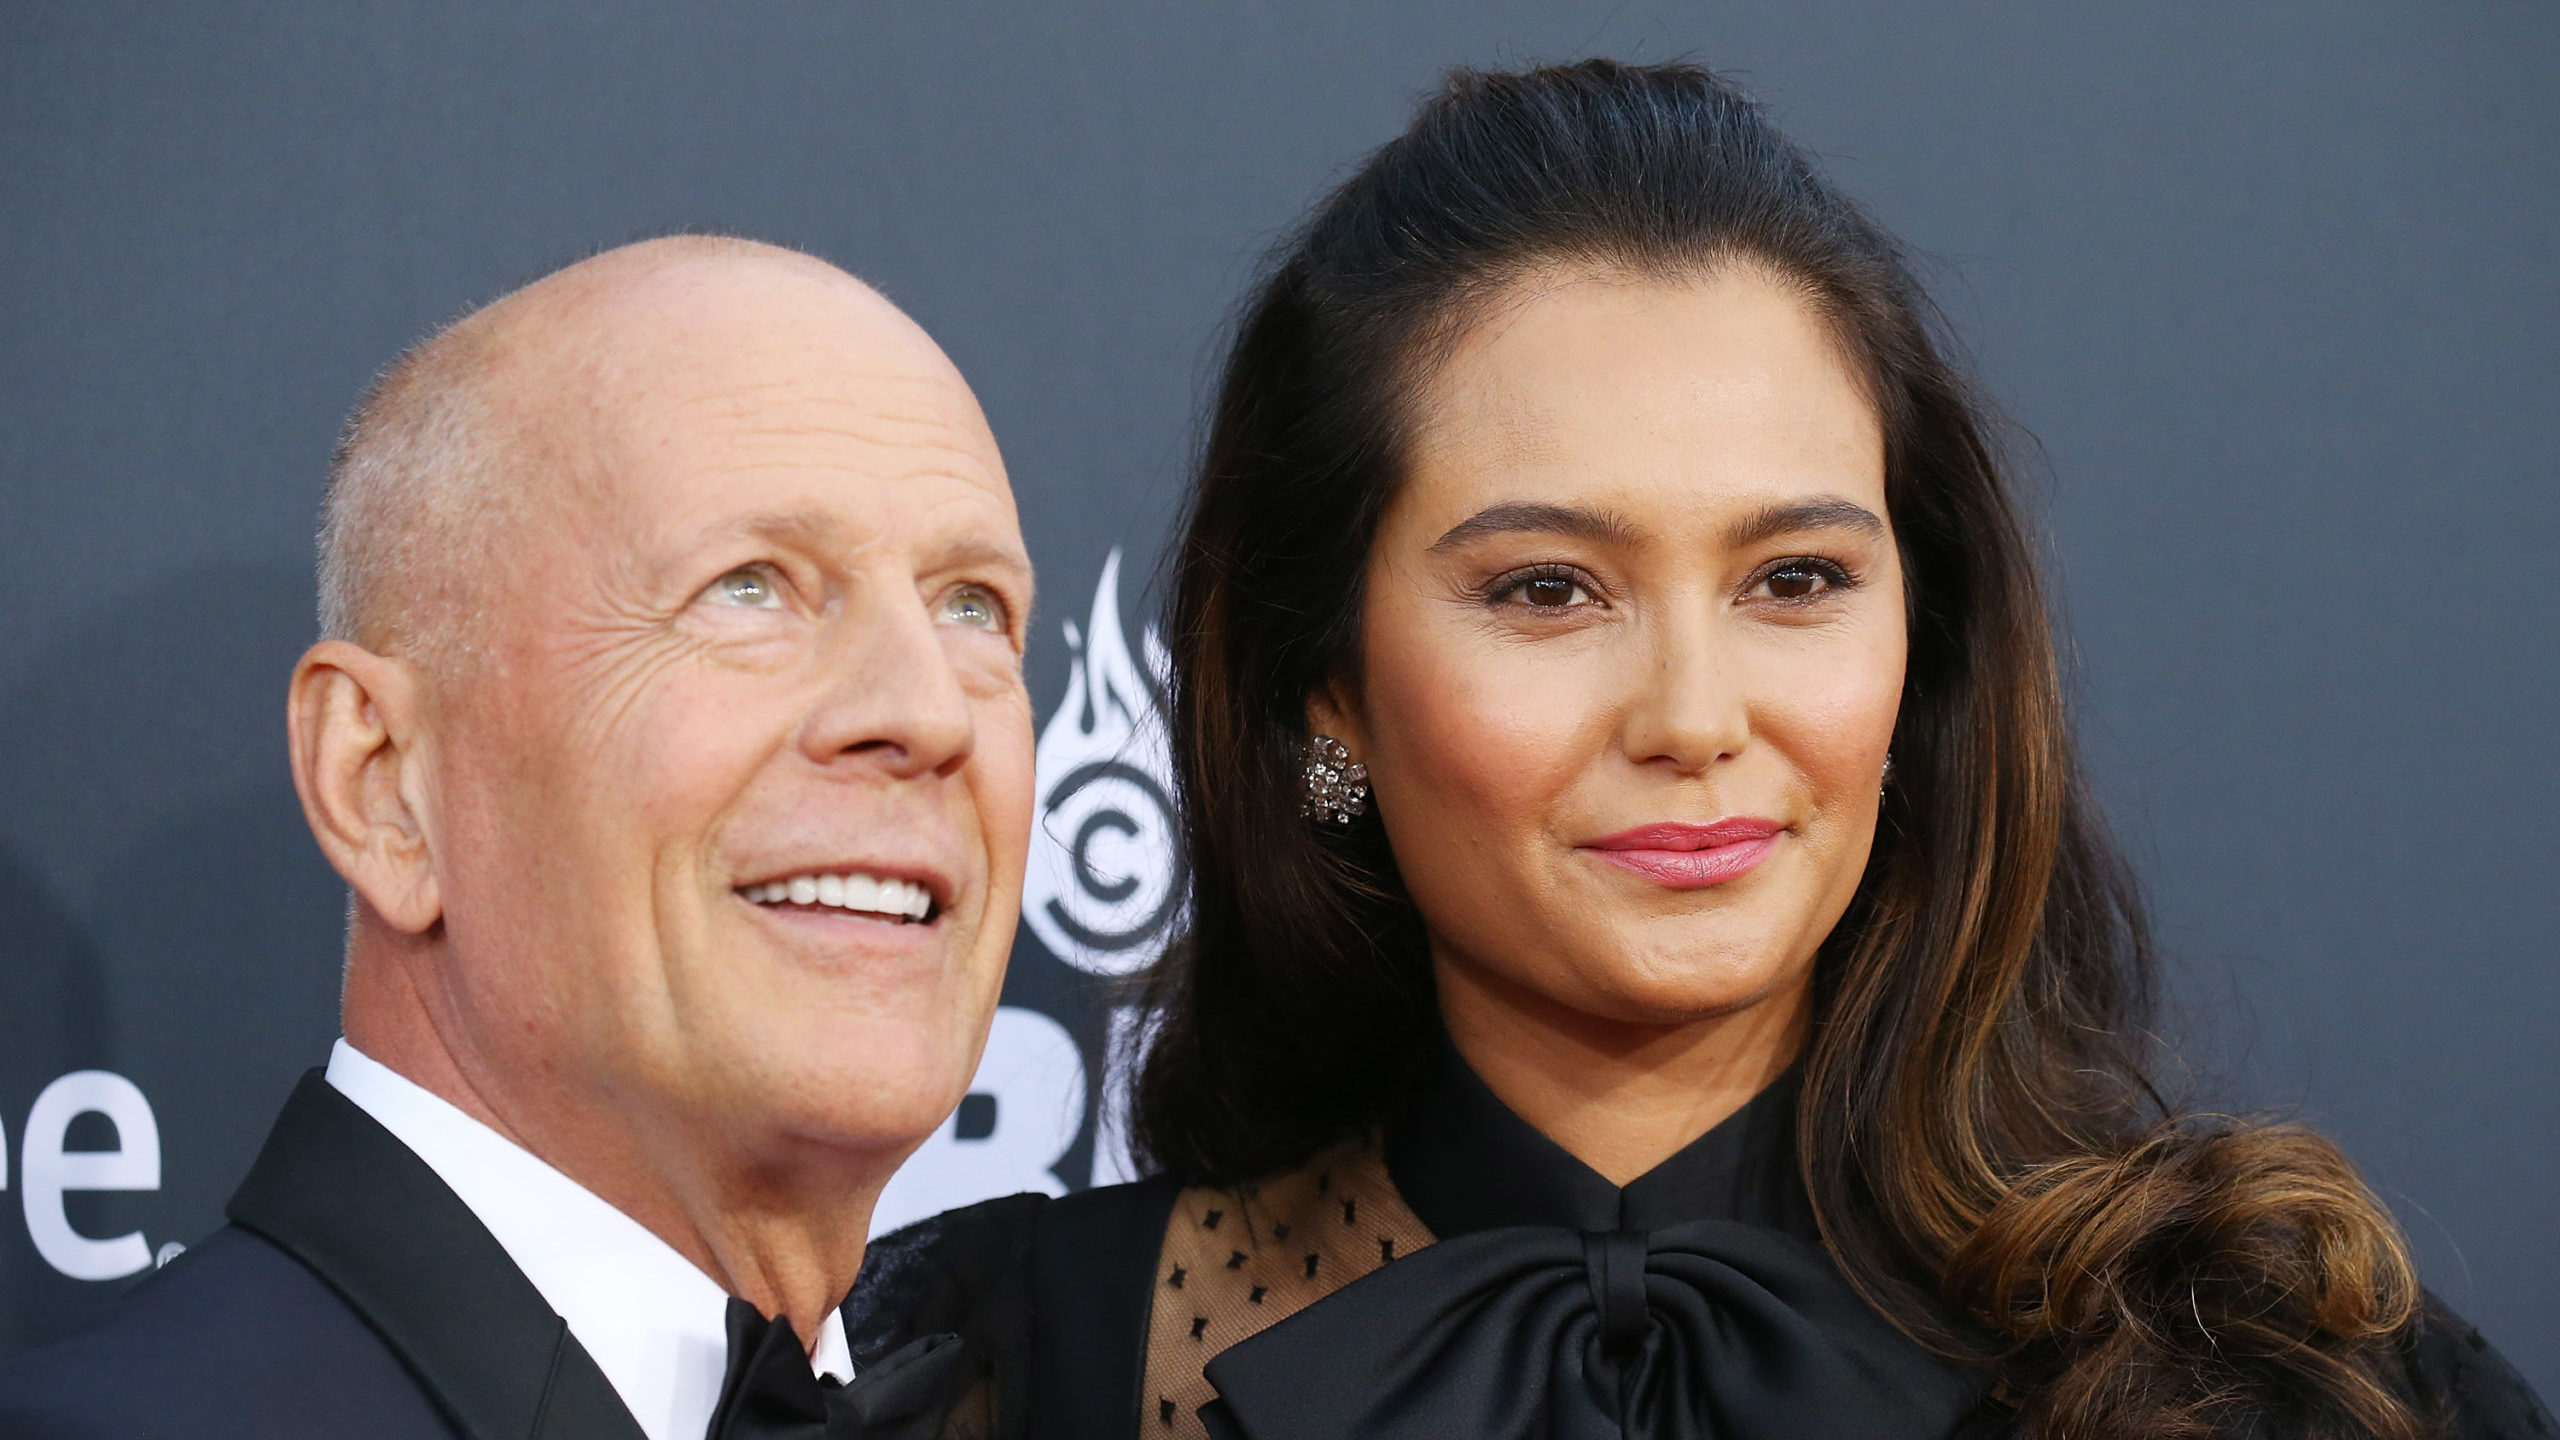 "You are a drama queen."  Bruce Willis' wife criticized for speaking out about the actor's illness